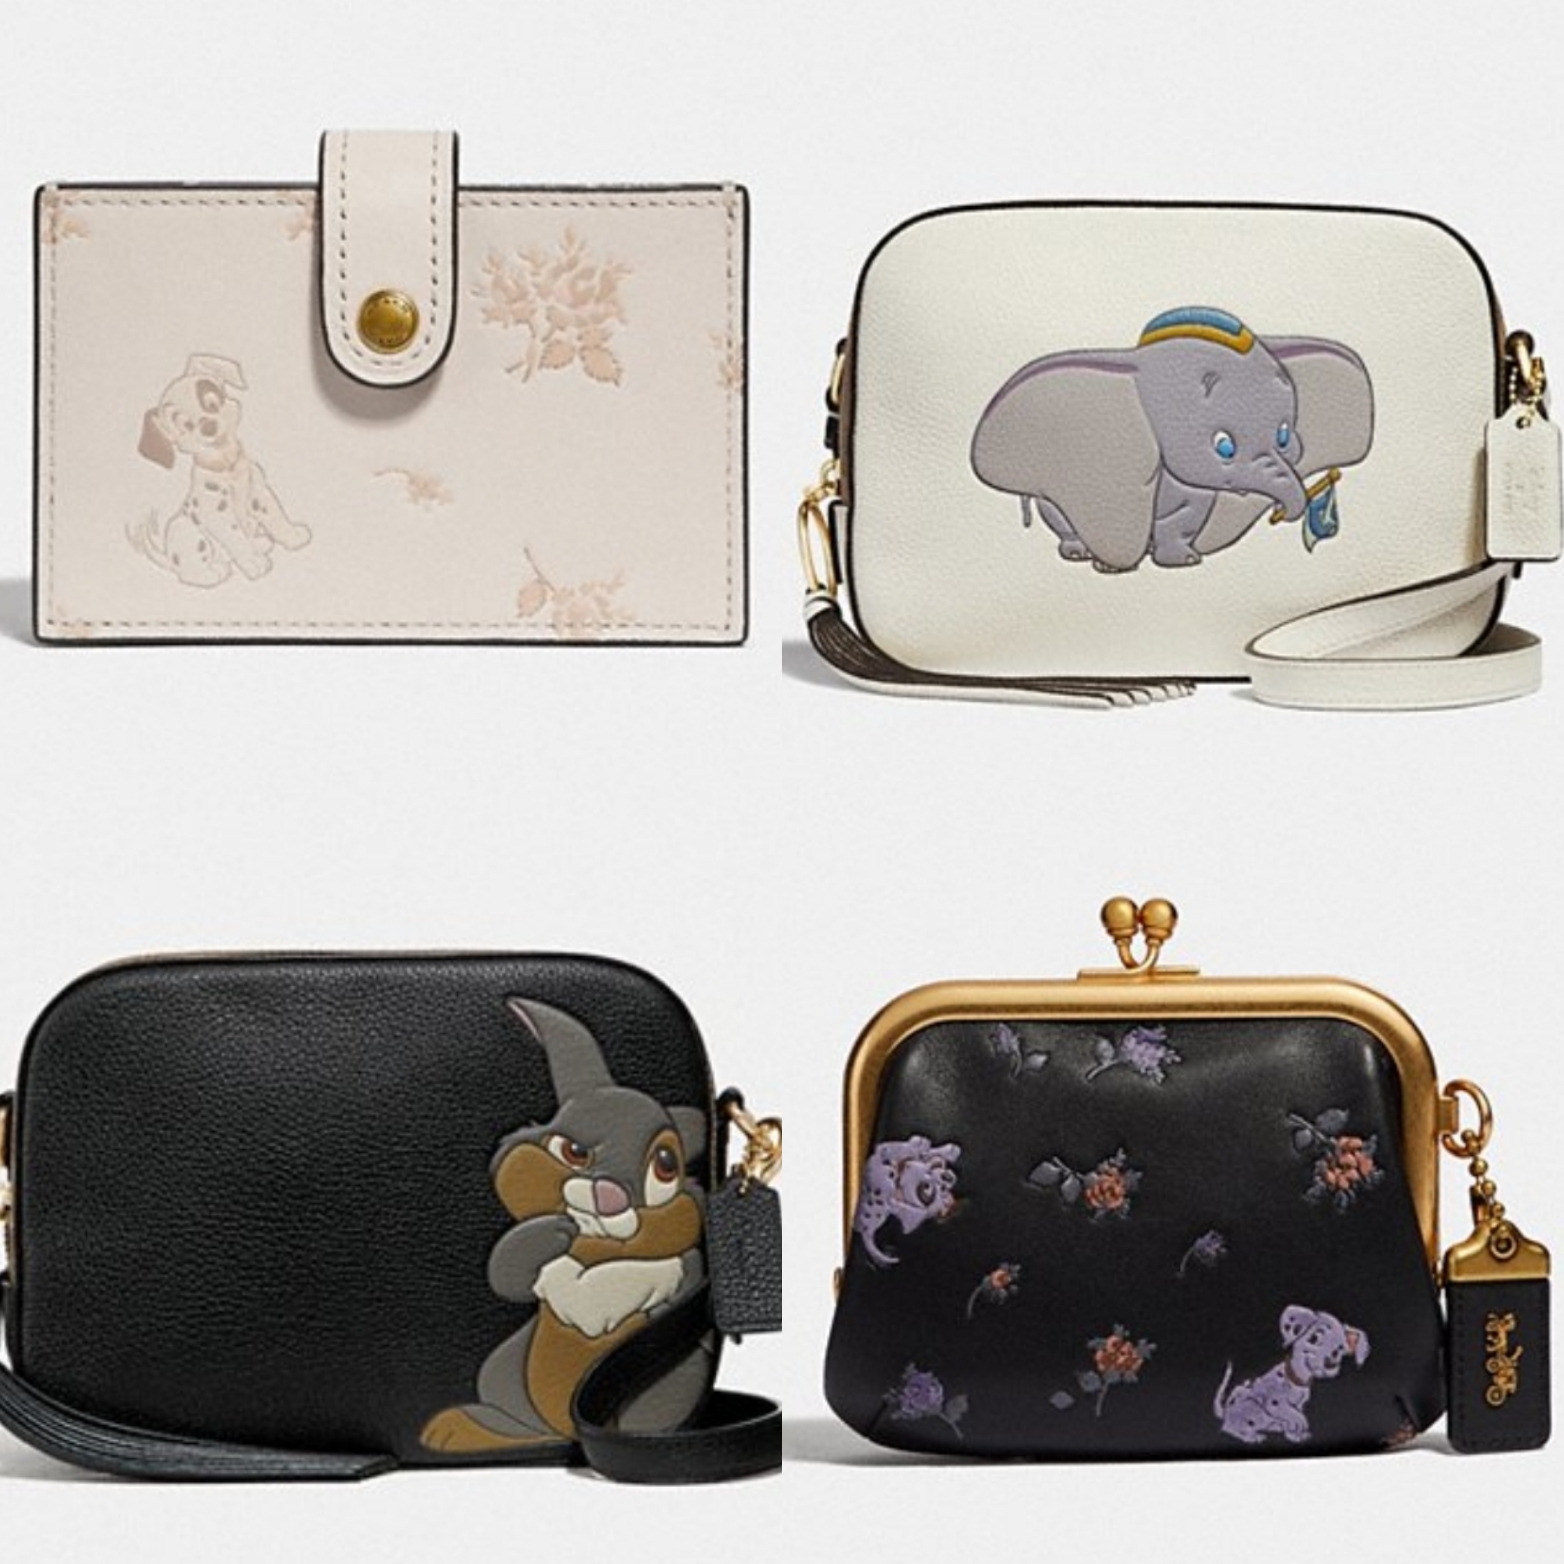 Coach Celebrates Our Disney Animal Friends In the 2019 Spring Collection!